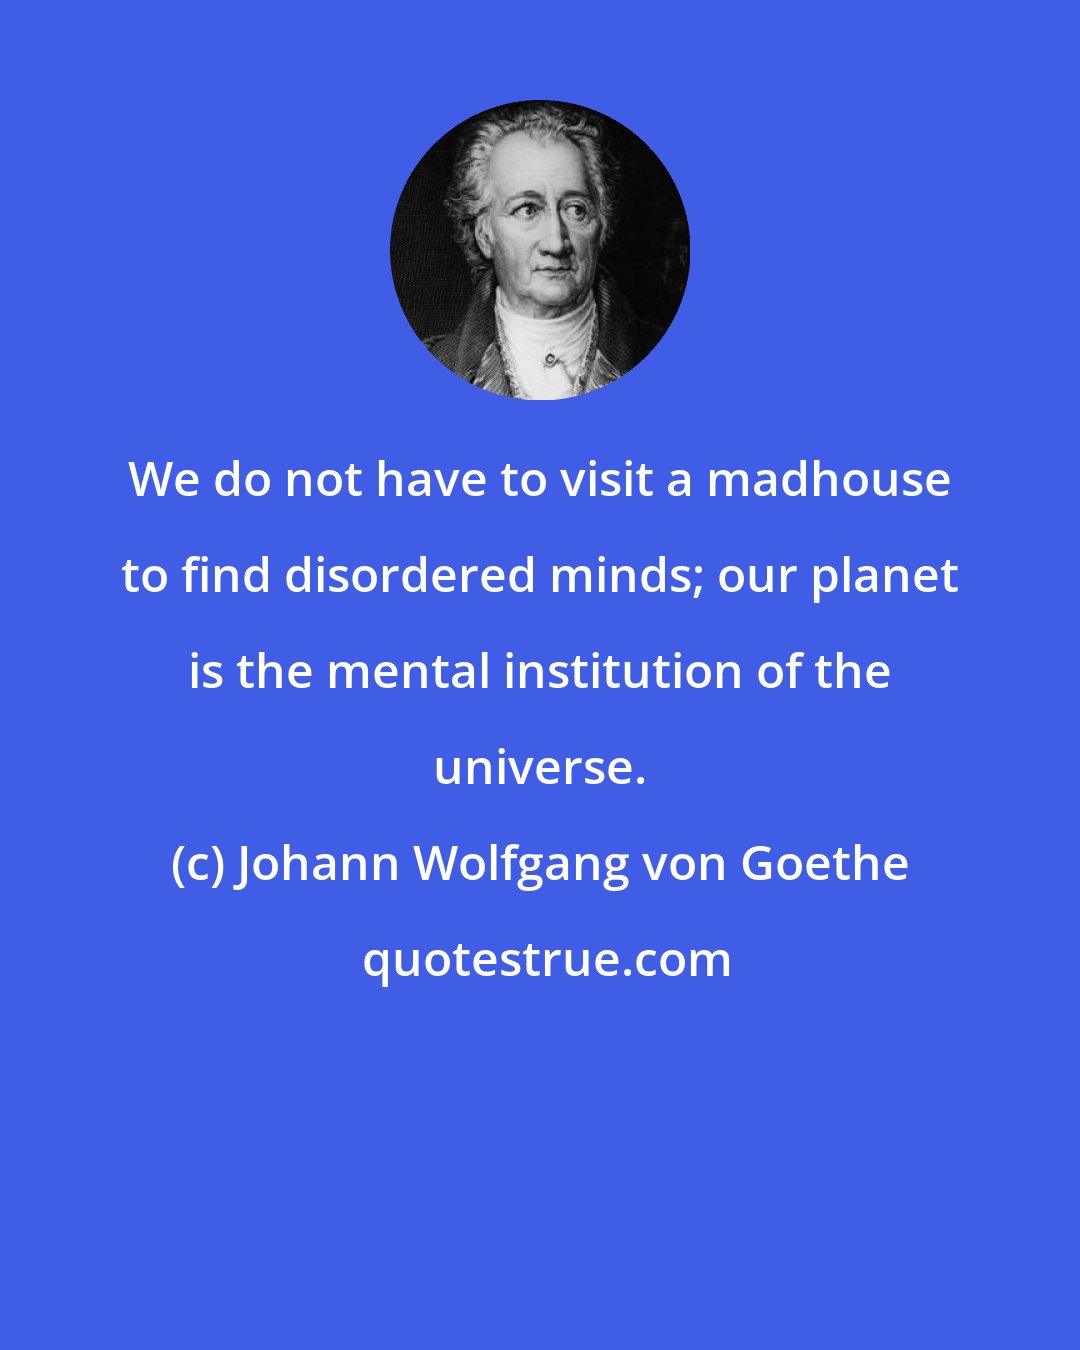 Johann Wolfgang von Goethe: We do not have to visit a madhouse to find disordered minds; our planet is the mental institution of the universe.